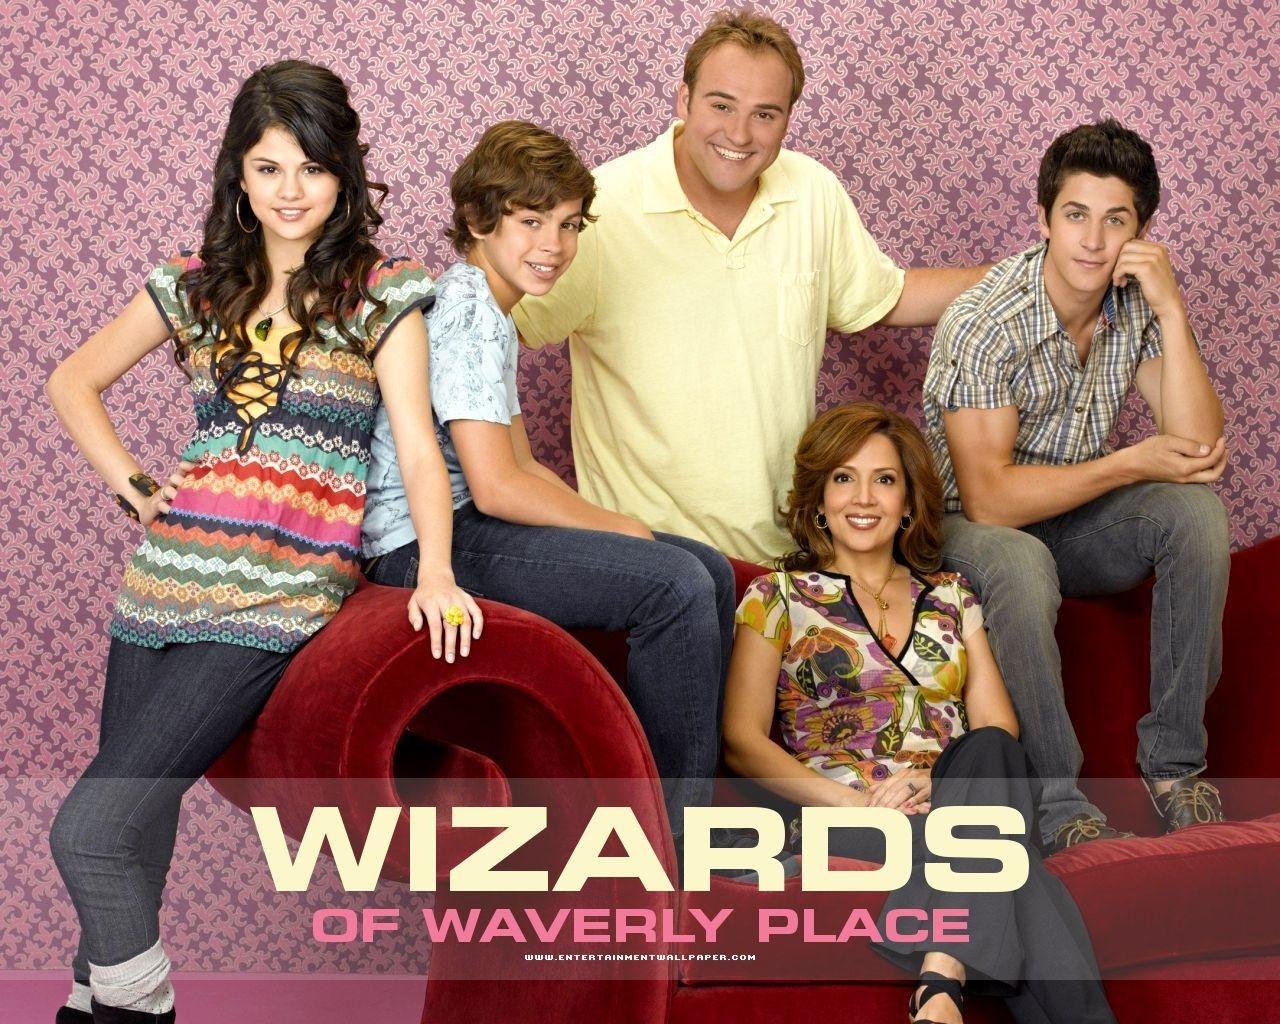 ImageLinks Wizards Of Waverly Place Tropes & Idioms